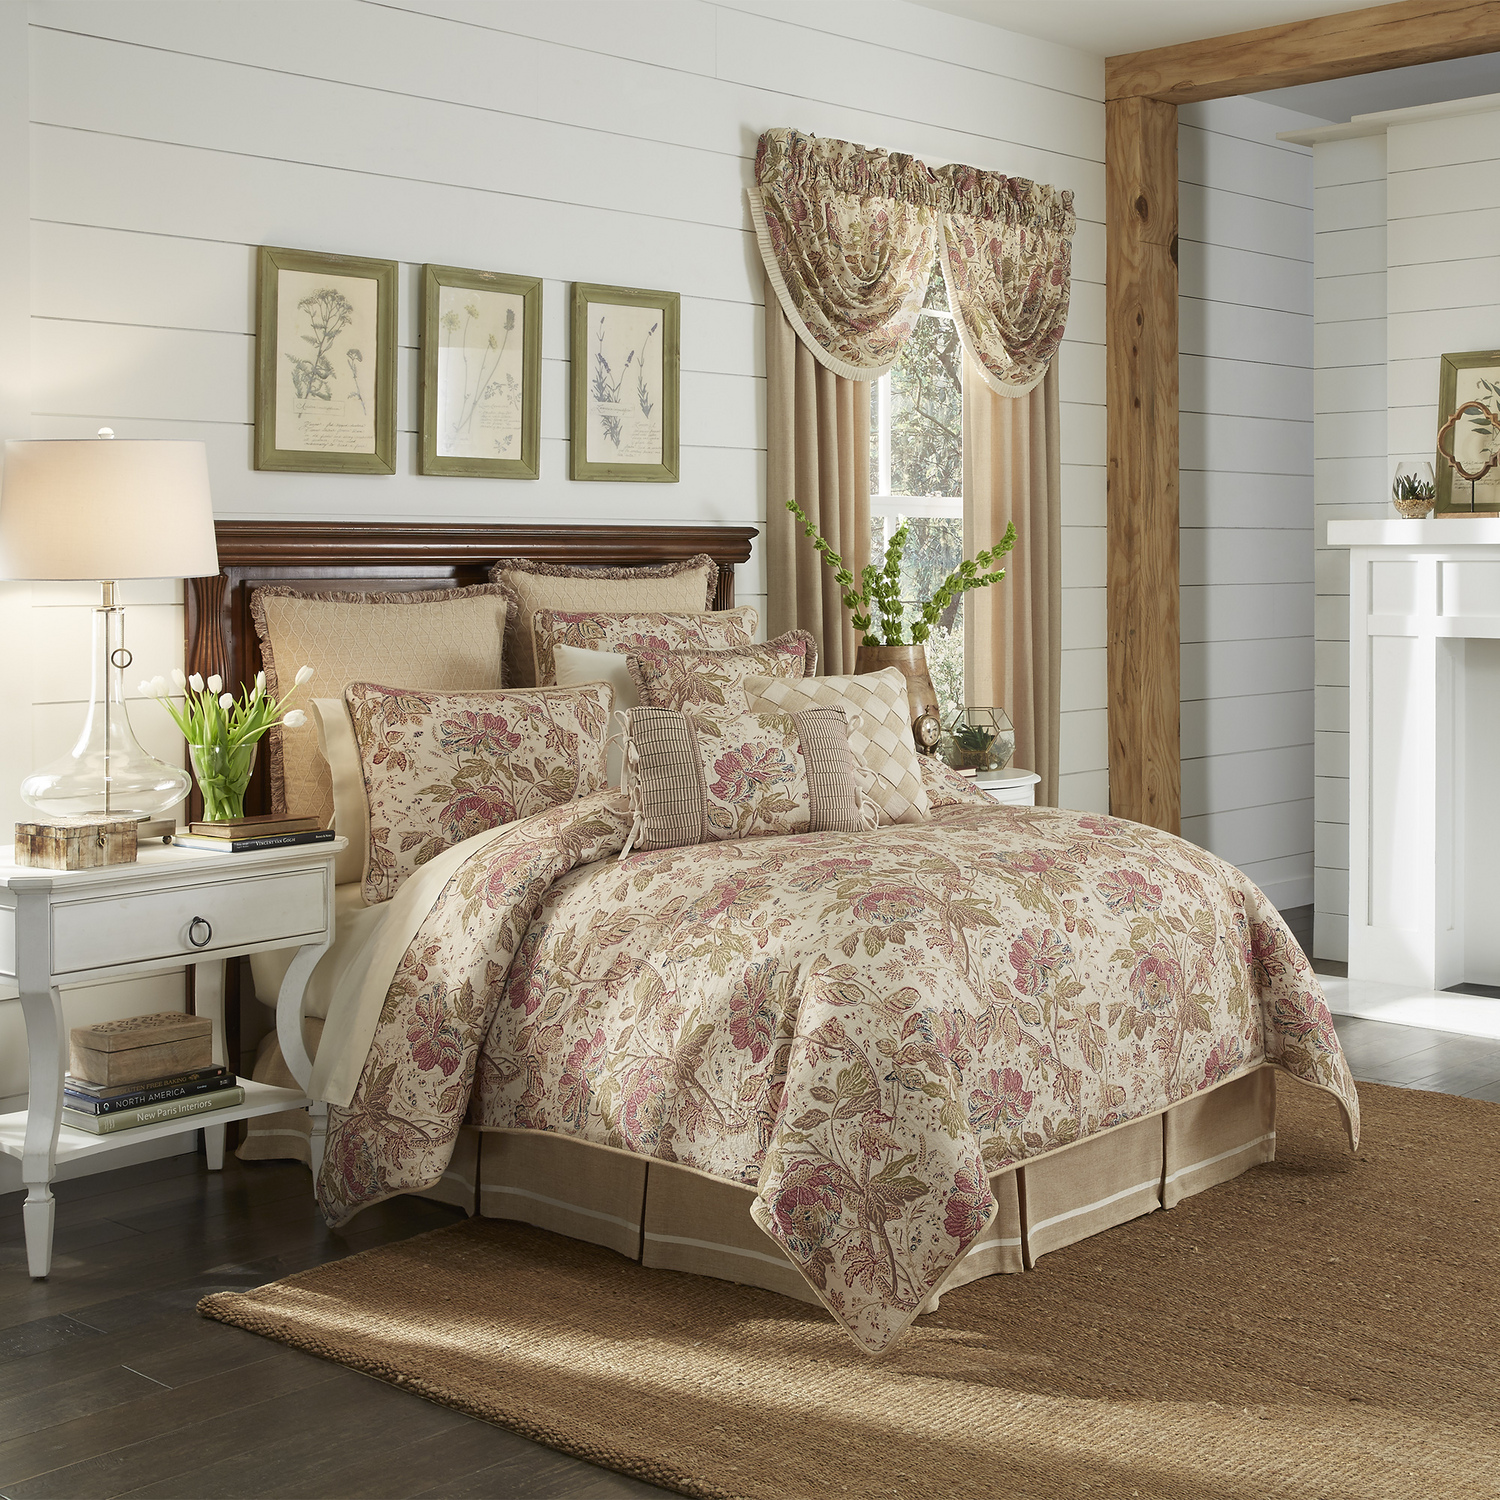 Camille By Croscill Home Fashions Beddingsuperstore Com